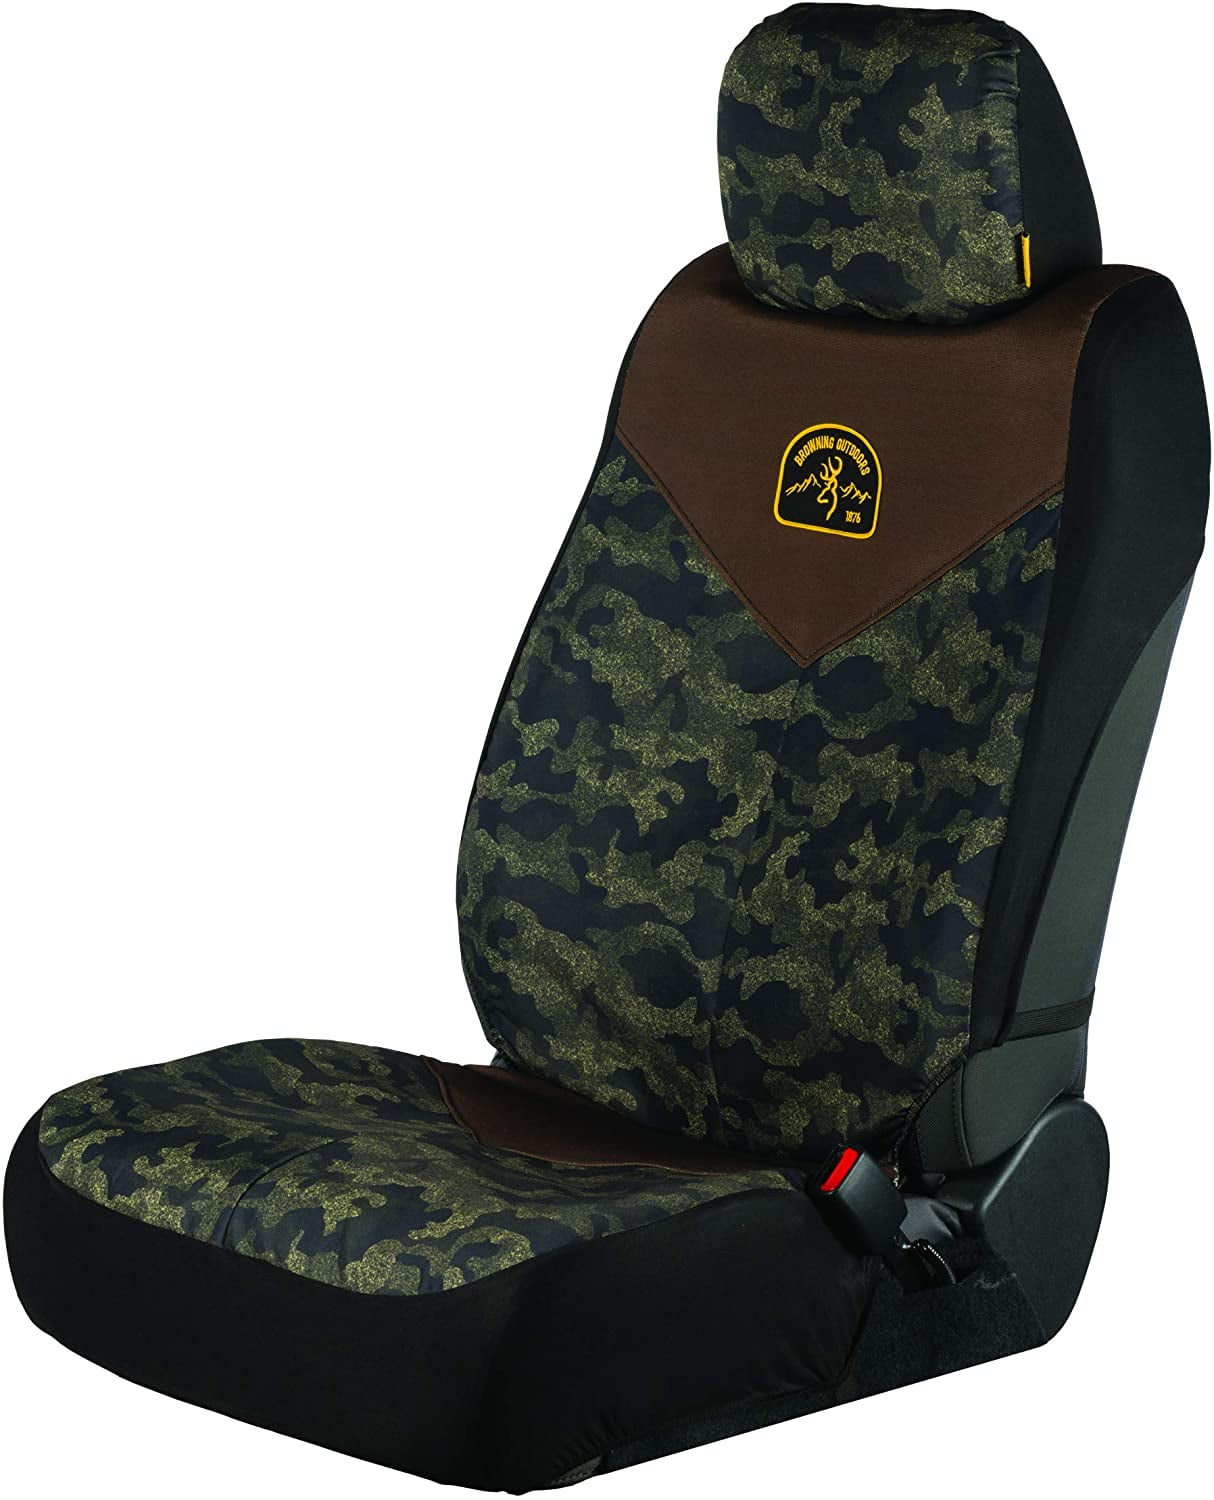  TOYOUN Camo Universal Front Car Seat Covers Waterproof Highback  Bucket Seat Covers-Fit Most Cars, Trucks, SUVS, Vans 2 PCS Auto Fabric Seat  Covers Camouflage Forest Pattern Car Seat Protector : Automotive